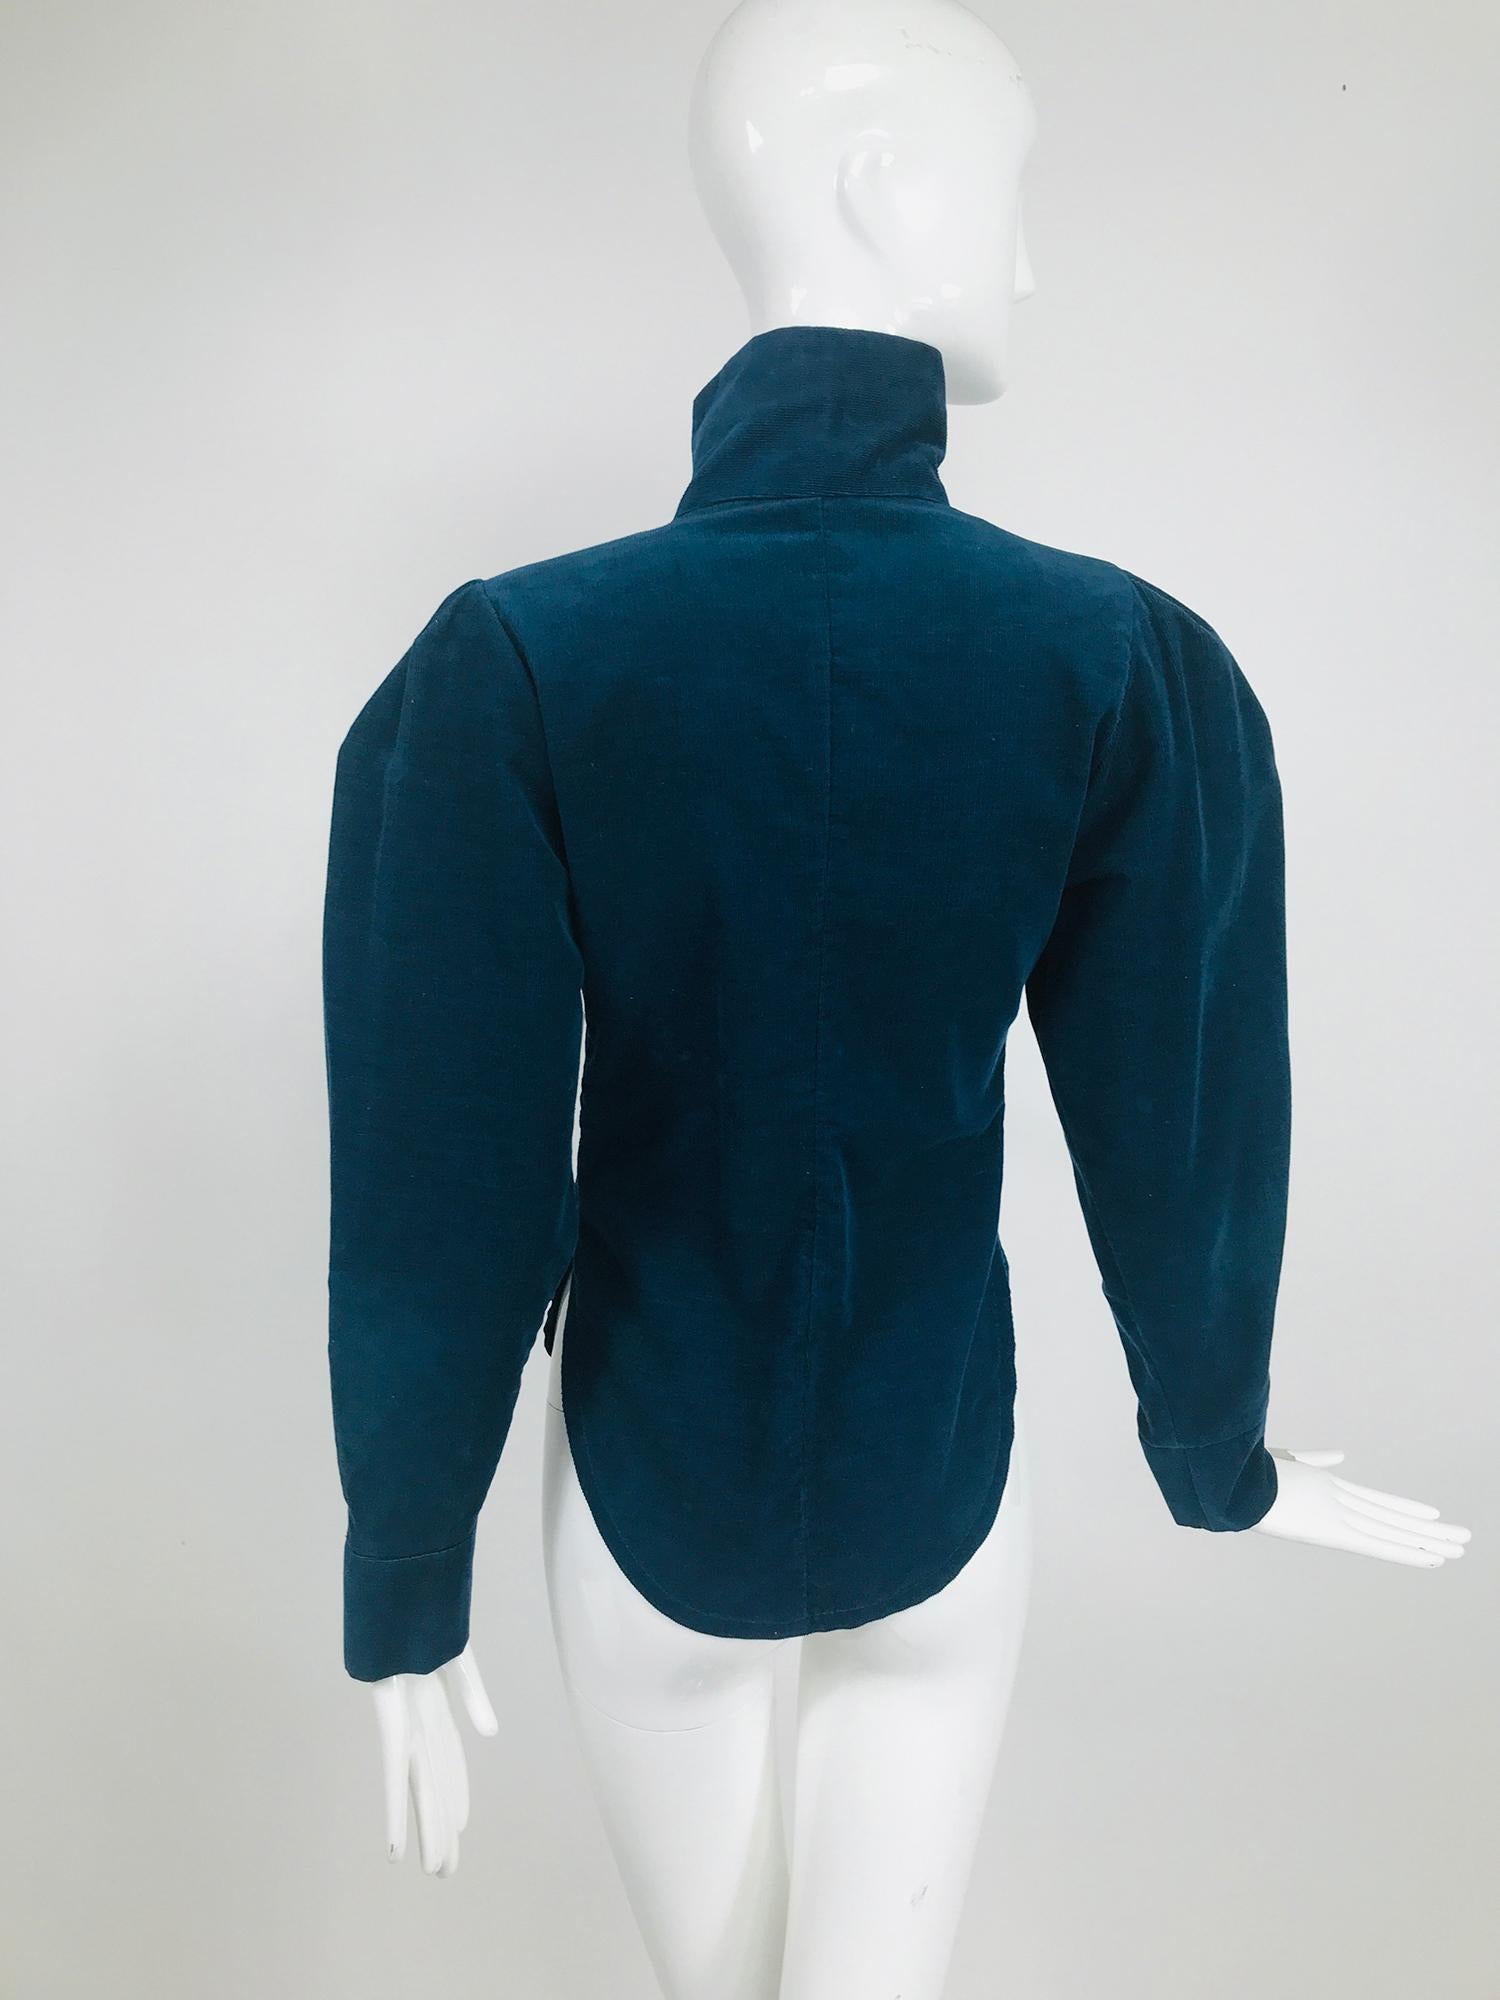 Vintage Norma Kamali Teal Blue Corduroy High Neck Fitted Shirt 1980s 3